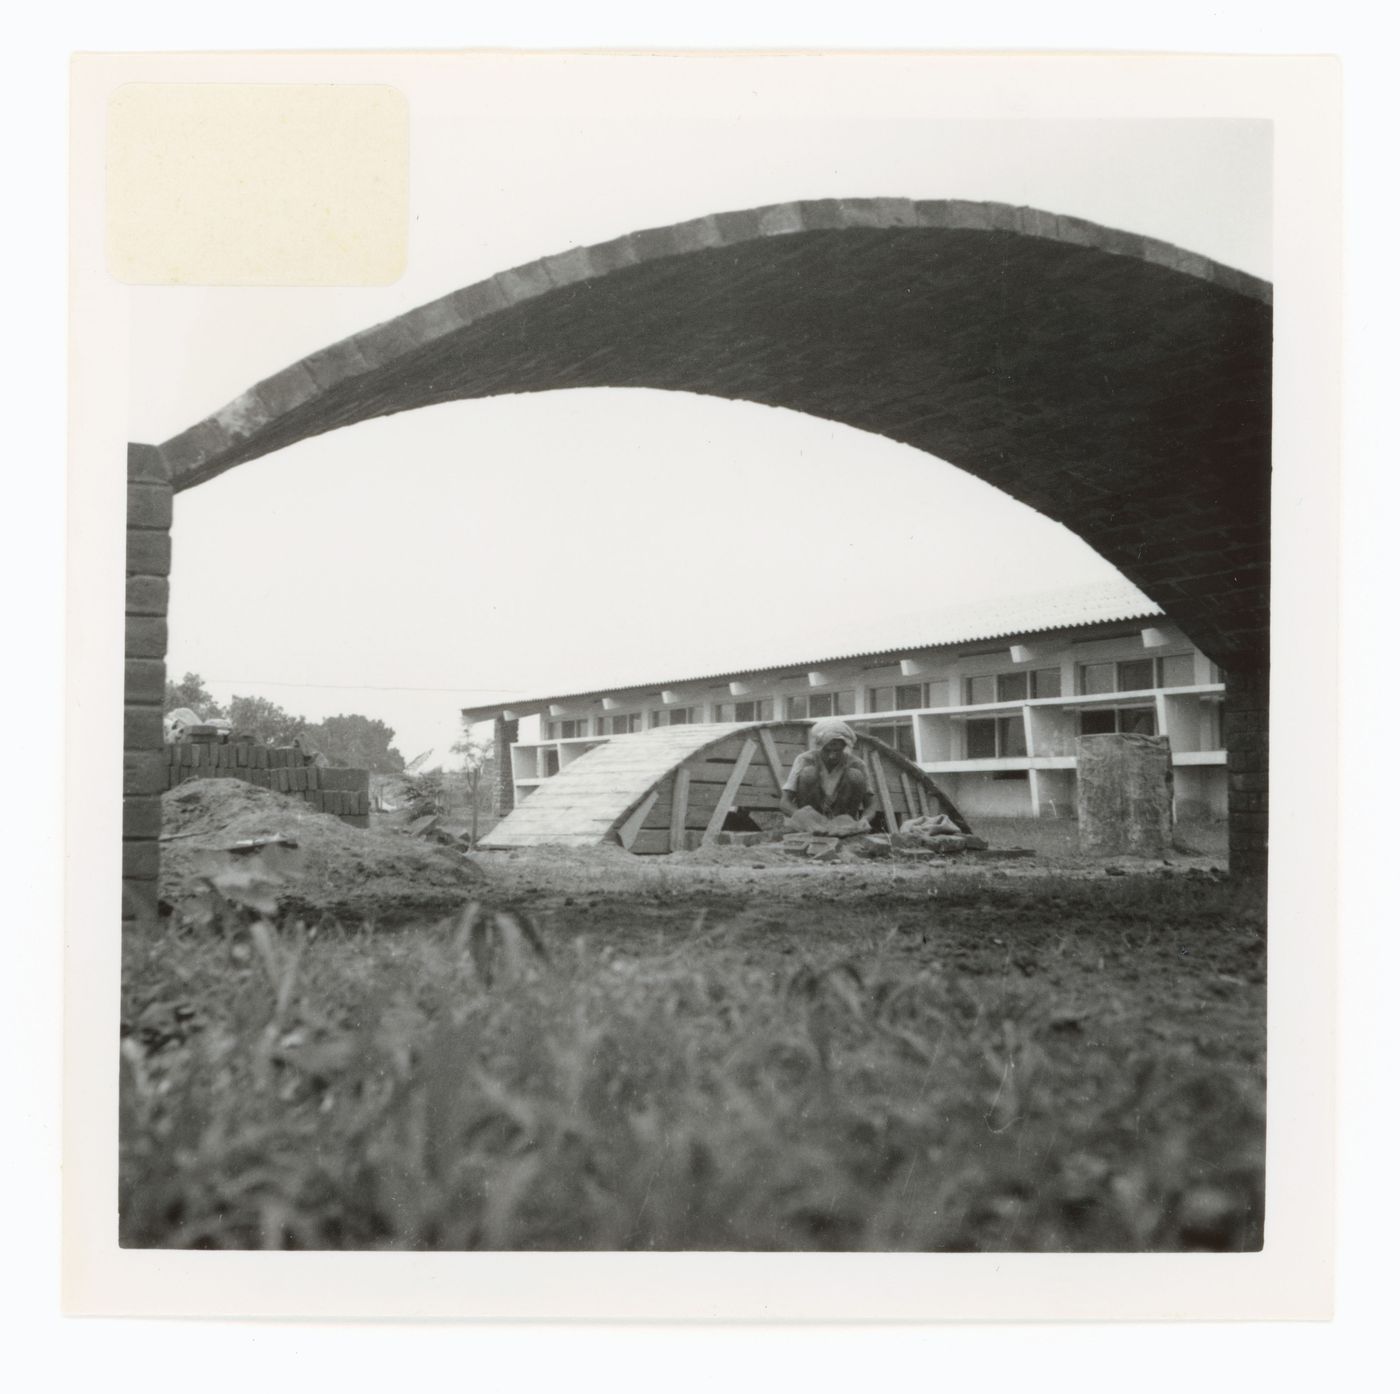 View of arched structures and a man squatting with an unidentified building in background, possibly in Chandigarh, India